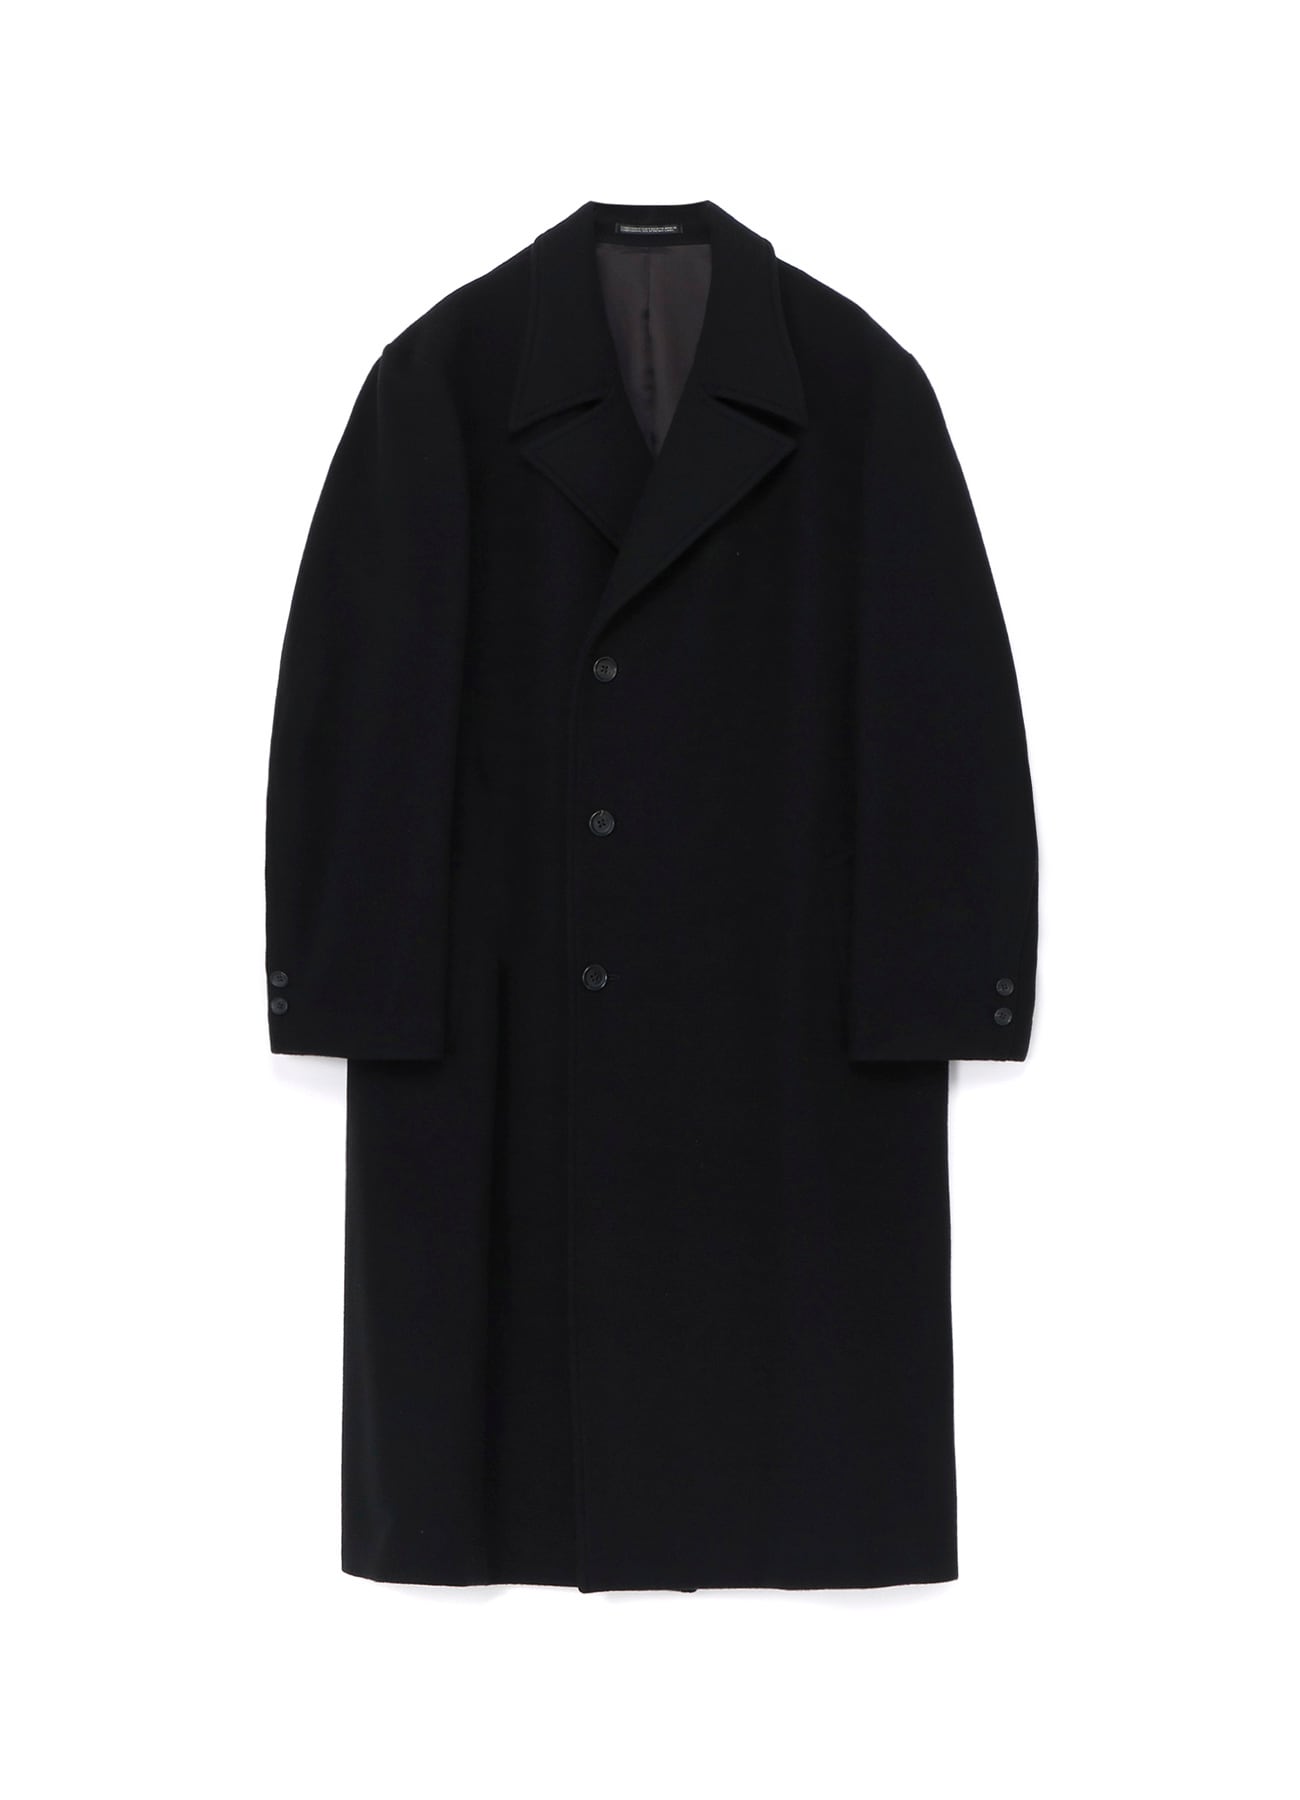 New Arrival | [Official] THE SHOP YOHJI YAMAMOTO (2/12 pages)